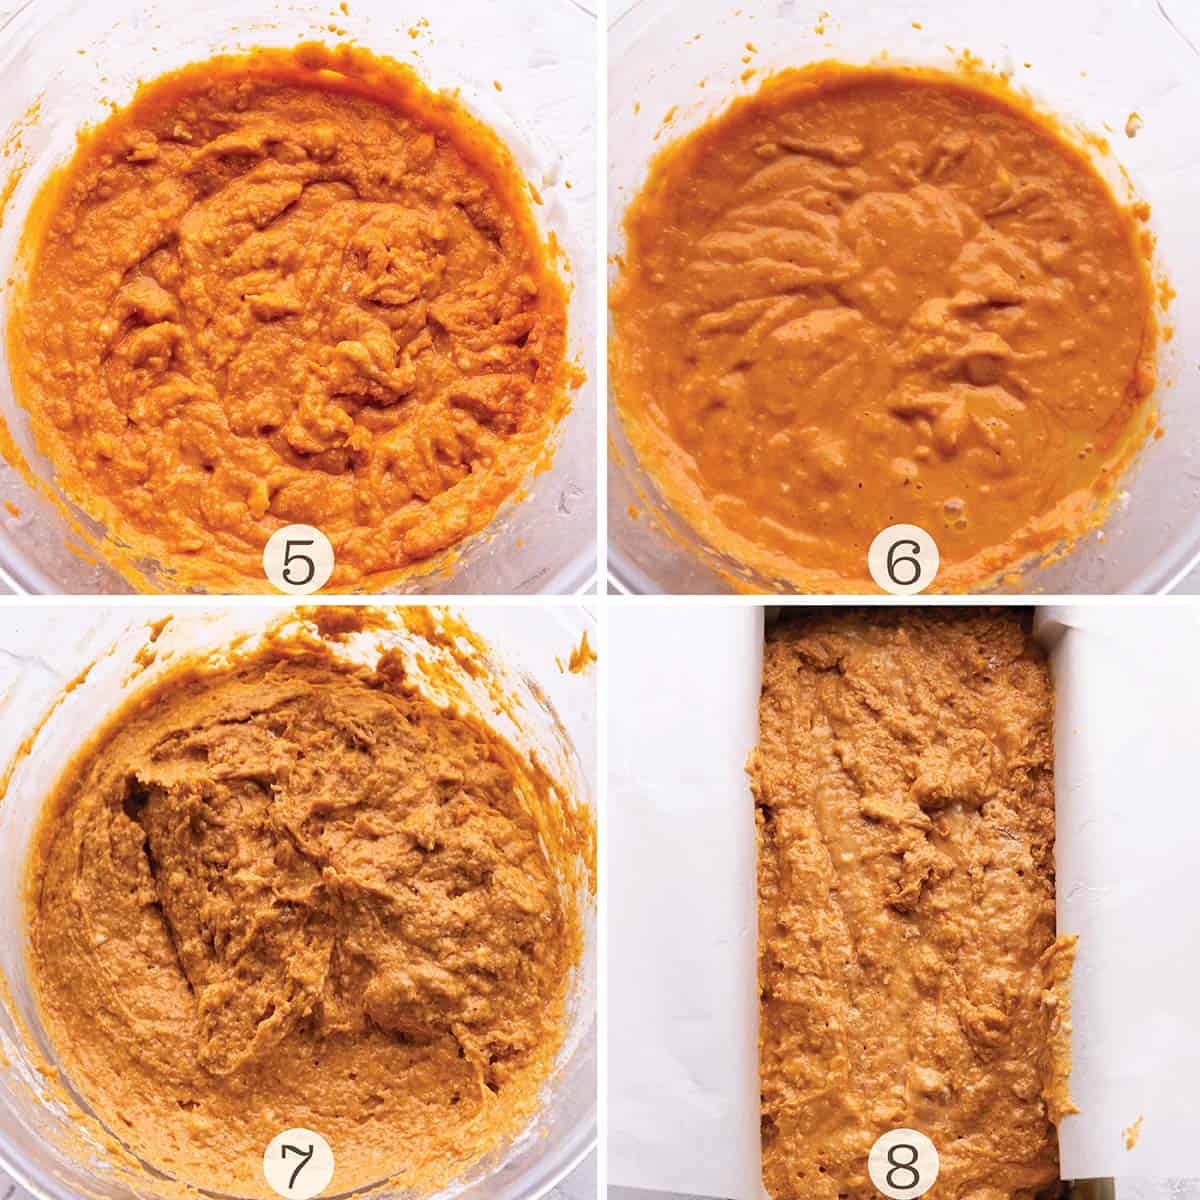 Four images of pumpkin batter being mixed and poured into a loaf pan.